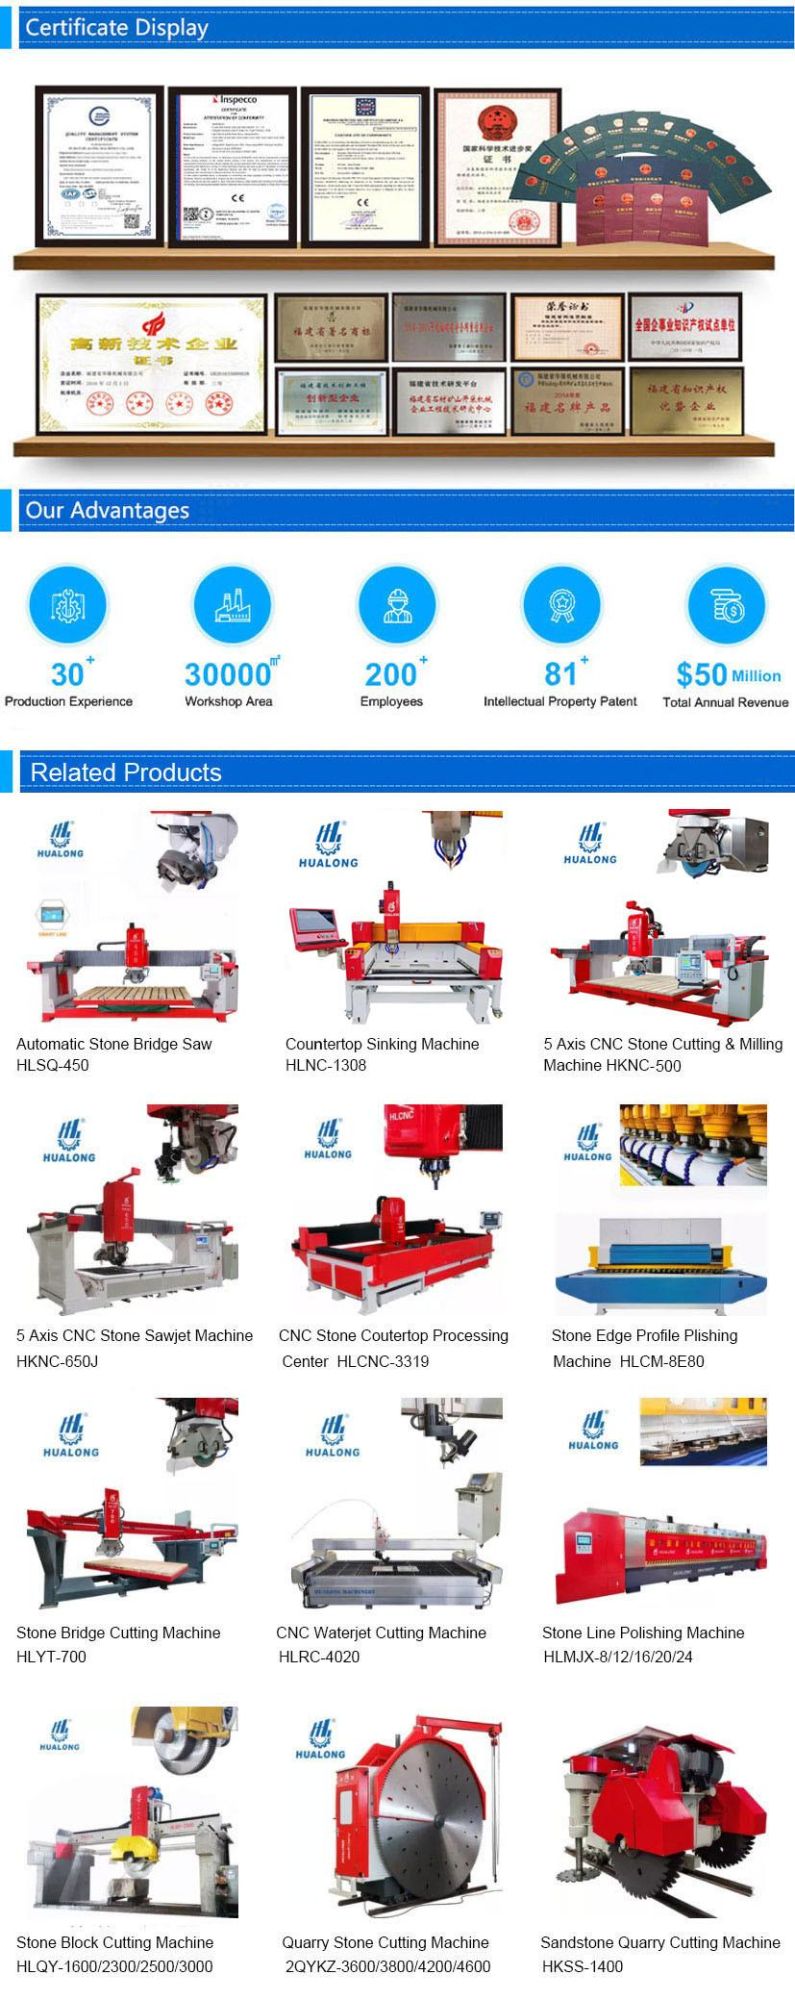 Hualong Machinery Multi-Function 5 Axis CNC Water Jet Cutting Machine, Glass Marble Waterjet Cutter Machine for Stone Metal Aluminum